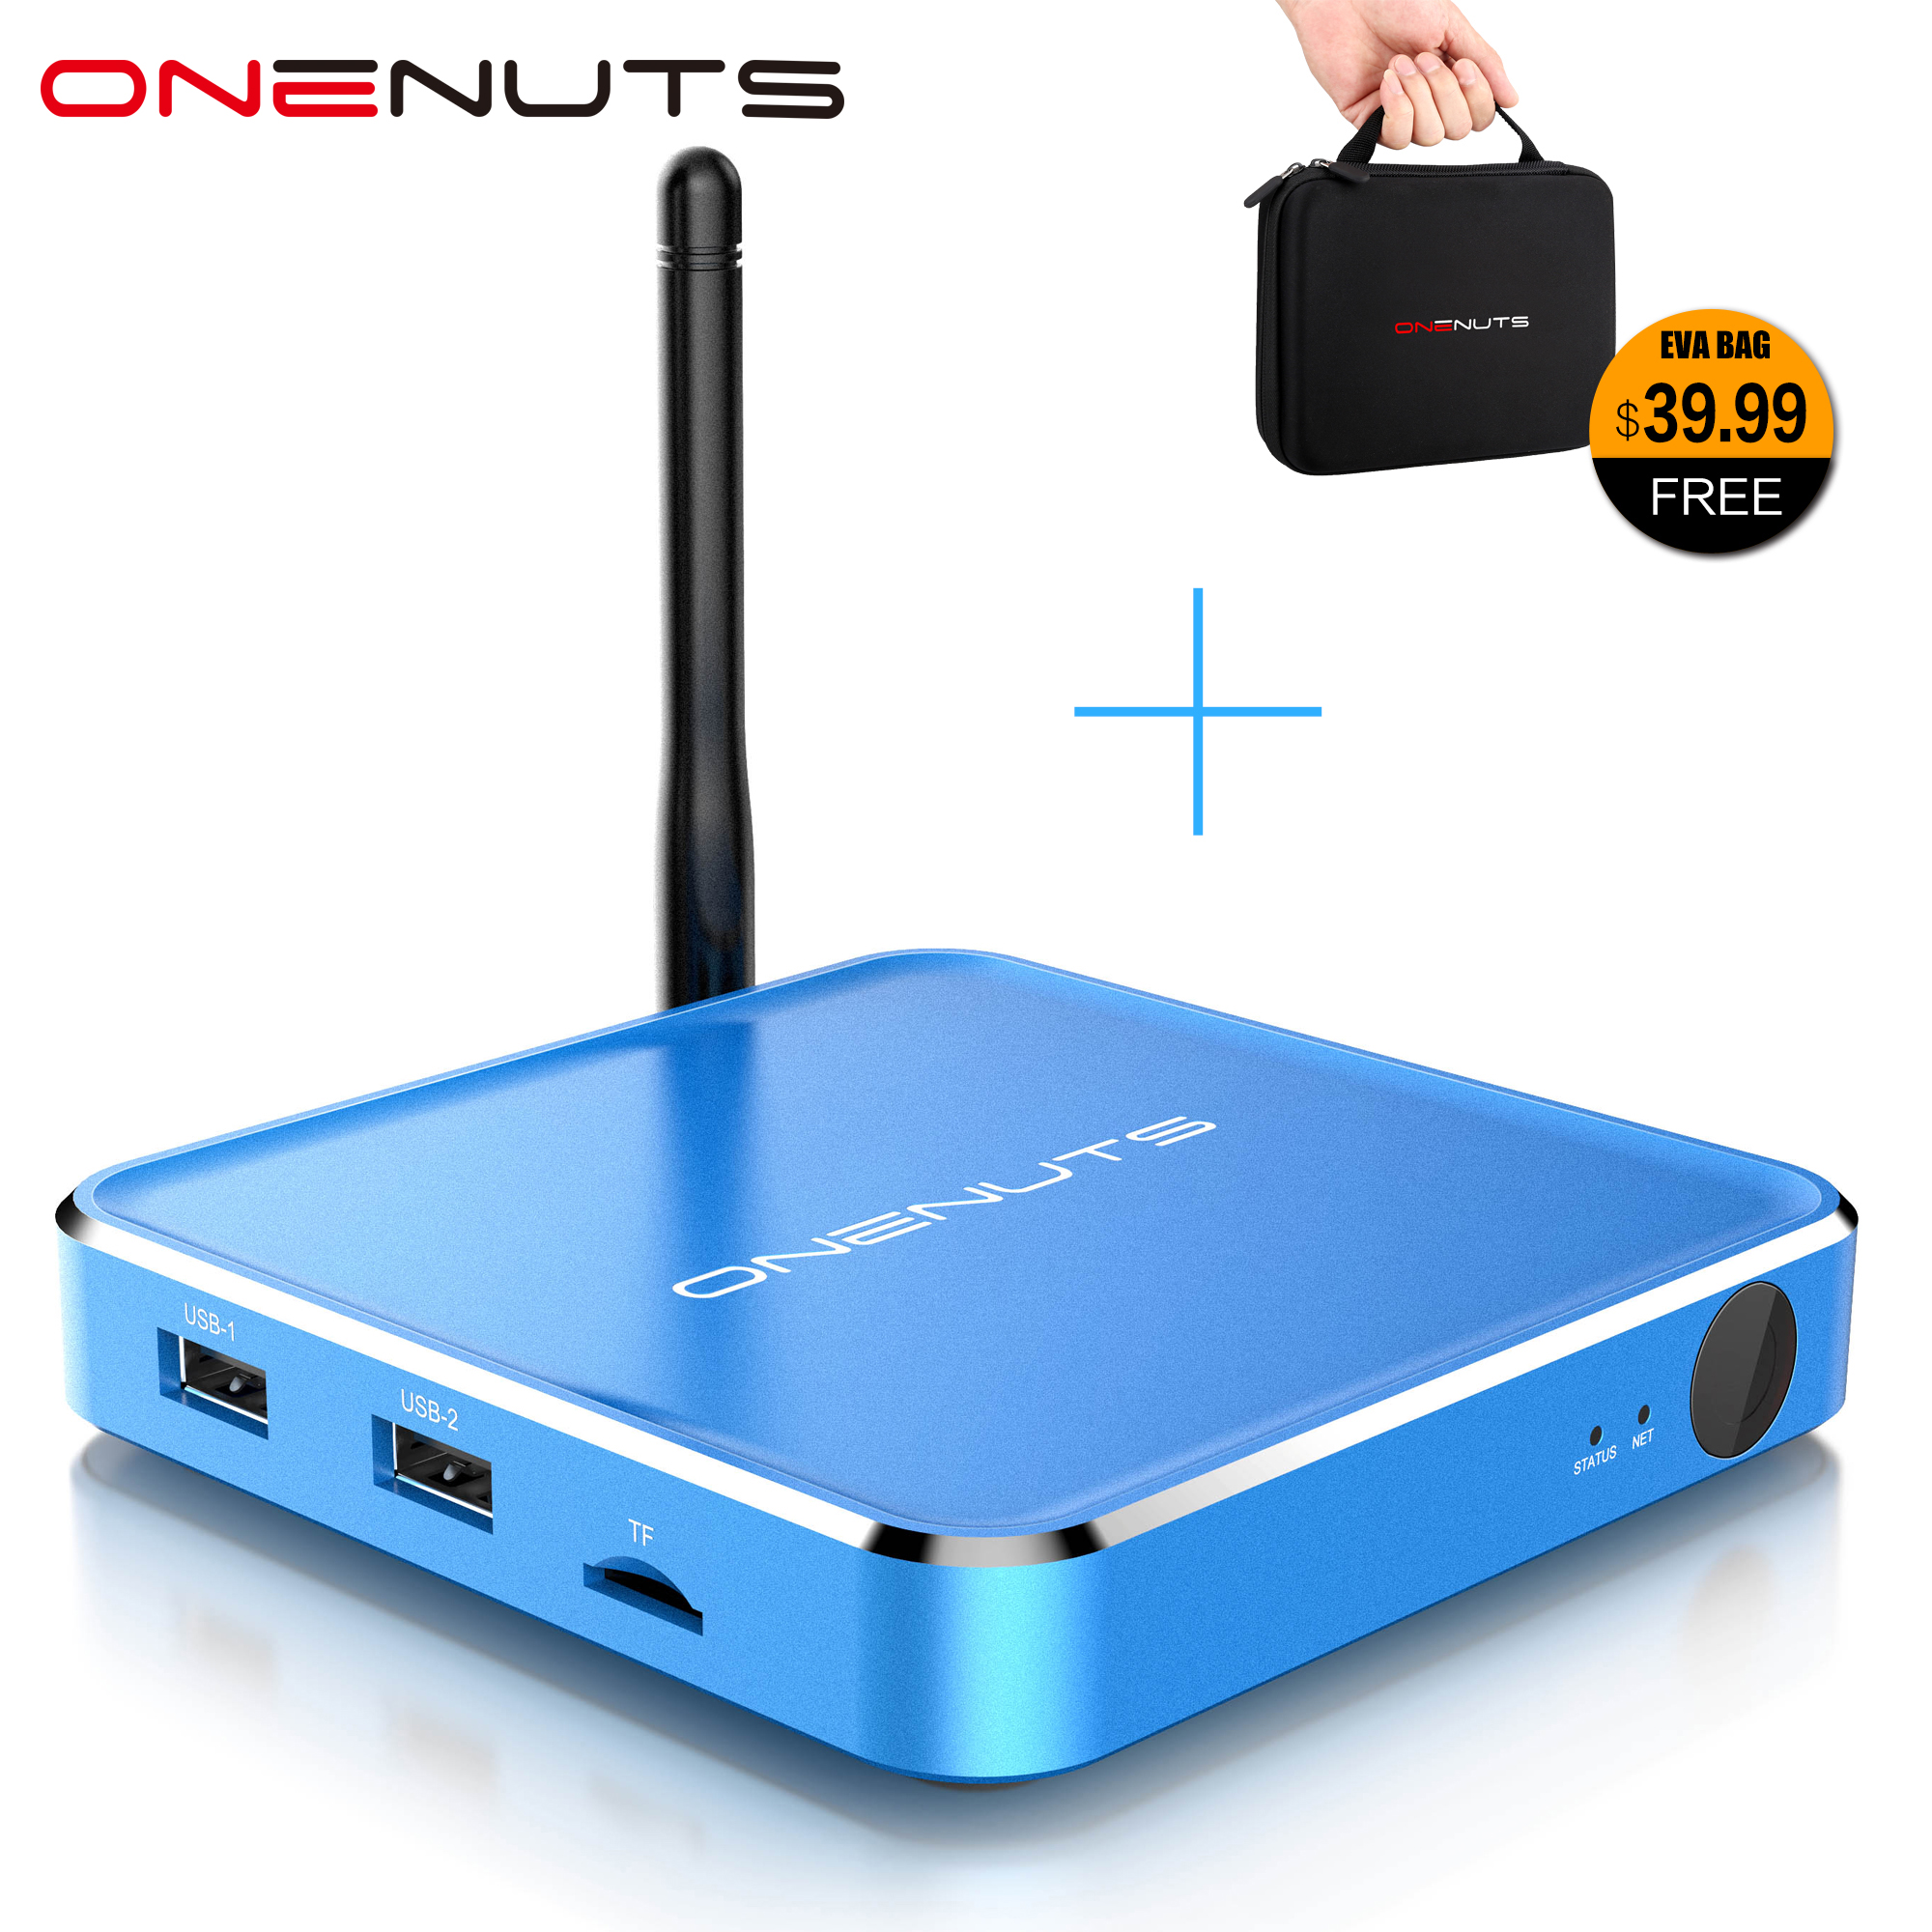 Android TV box บริษัท Gigabit Ethernet android smart tv box